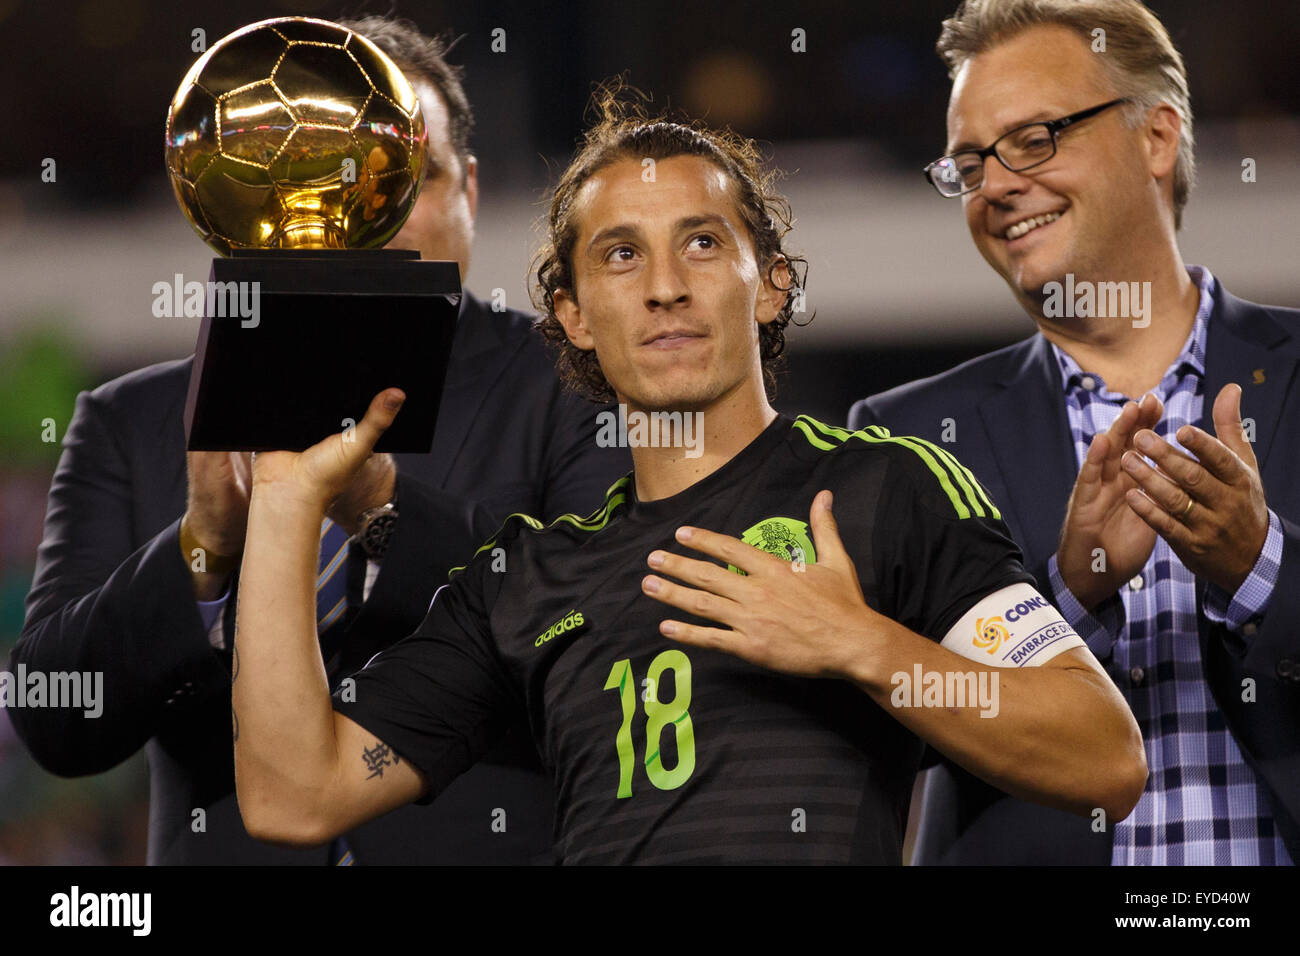 July 26, 2015: Mexico midfielder Andres Guardado (18) reacts to getting the Golden Ball award following the CONCACAF Gold Cup 2015 Final match between Jamaica and Mexico at Lincoln Financial Field in Philadelphia, Pennsylvania. Mexico won 3-1. Christopher Szagola/CSM Stock Photo